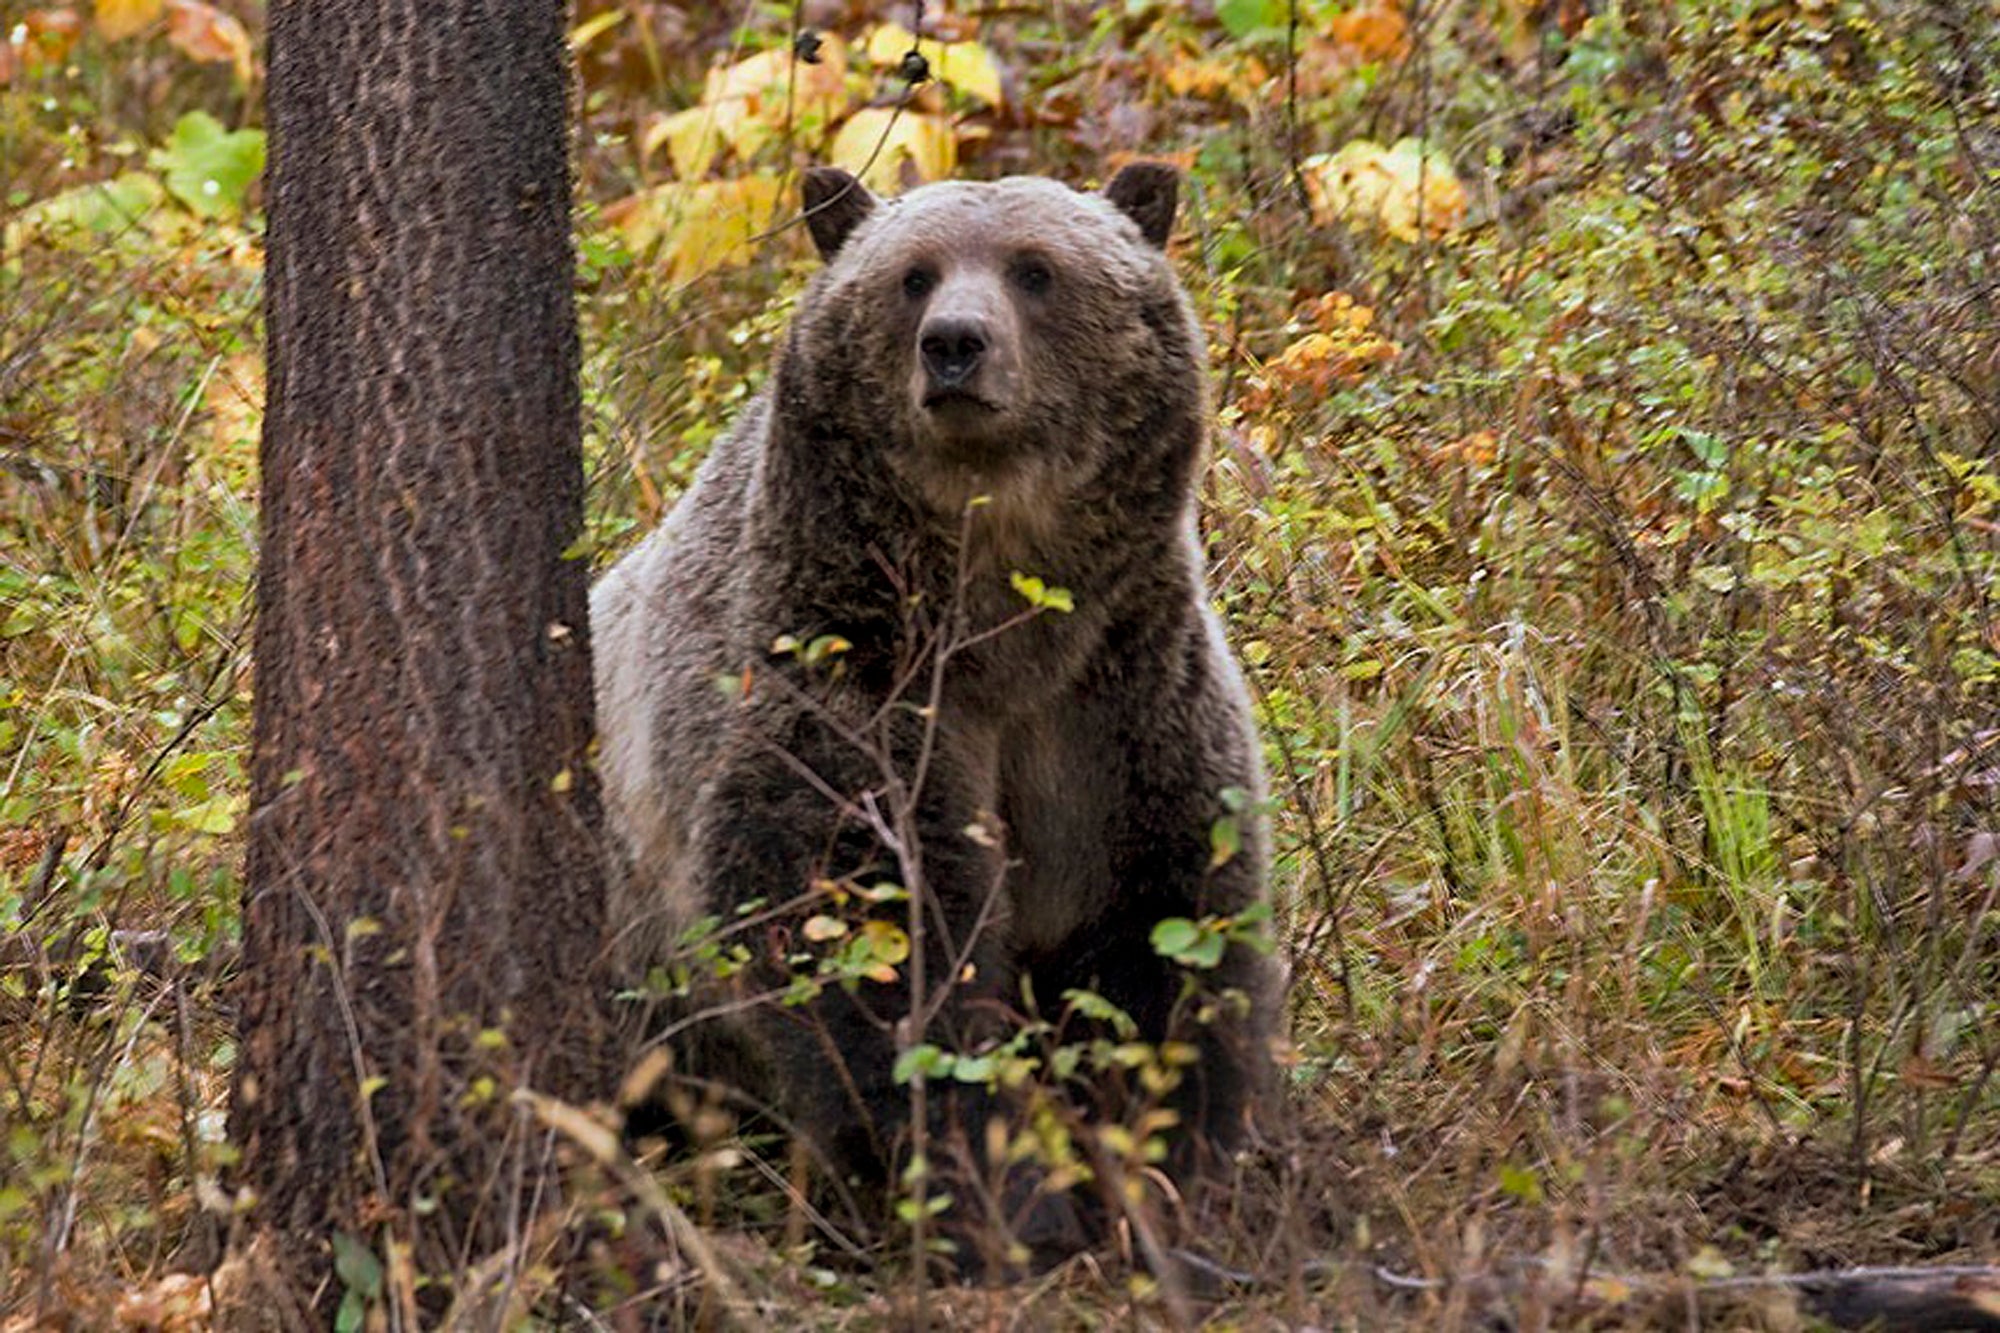 Undated file photo provided by the Montana Fish, Wildlife and Parks shows a sow grizzly bear spotted near Camas, in northwestern Montana.